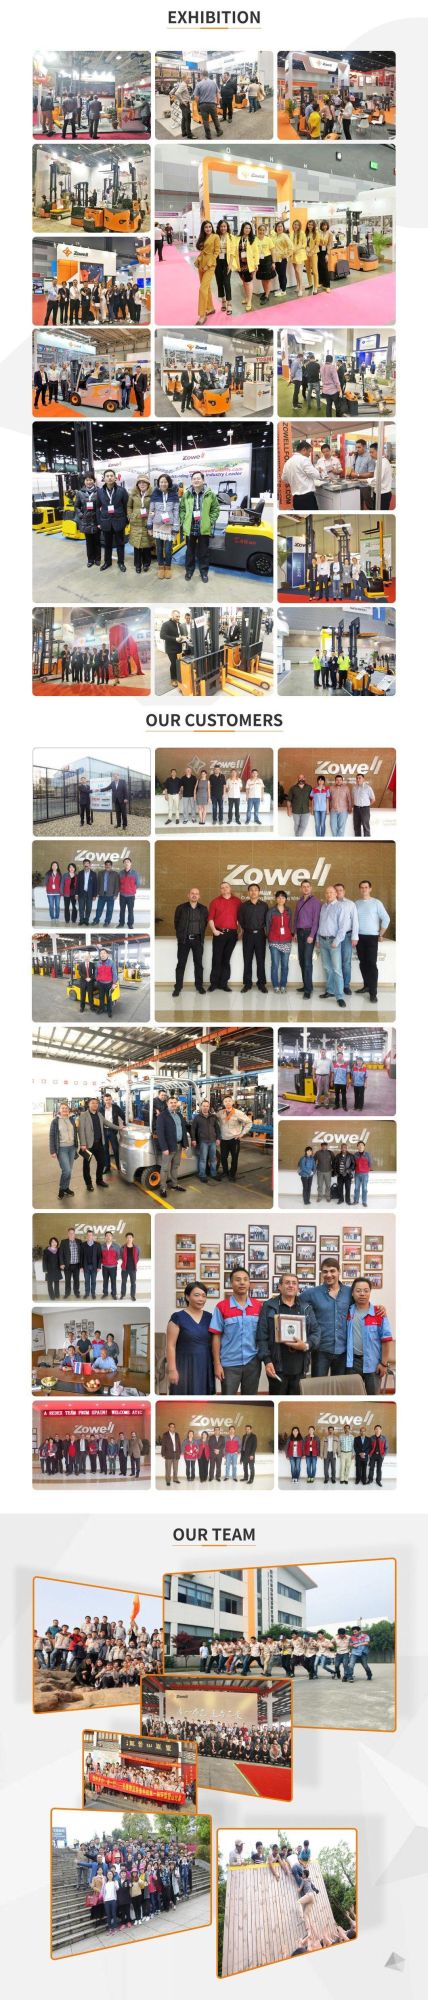 Adjustable Zowell Wooden Pallet 3540*1265mm Suzhou, China Electric Lifter Forklift Trucks